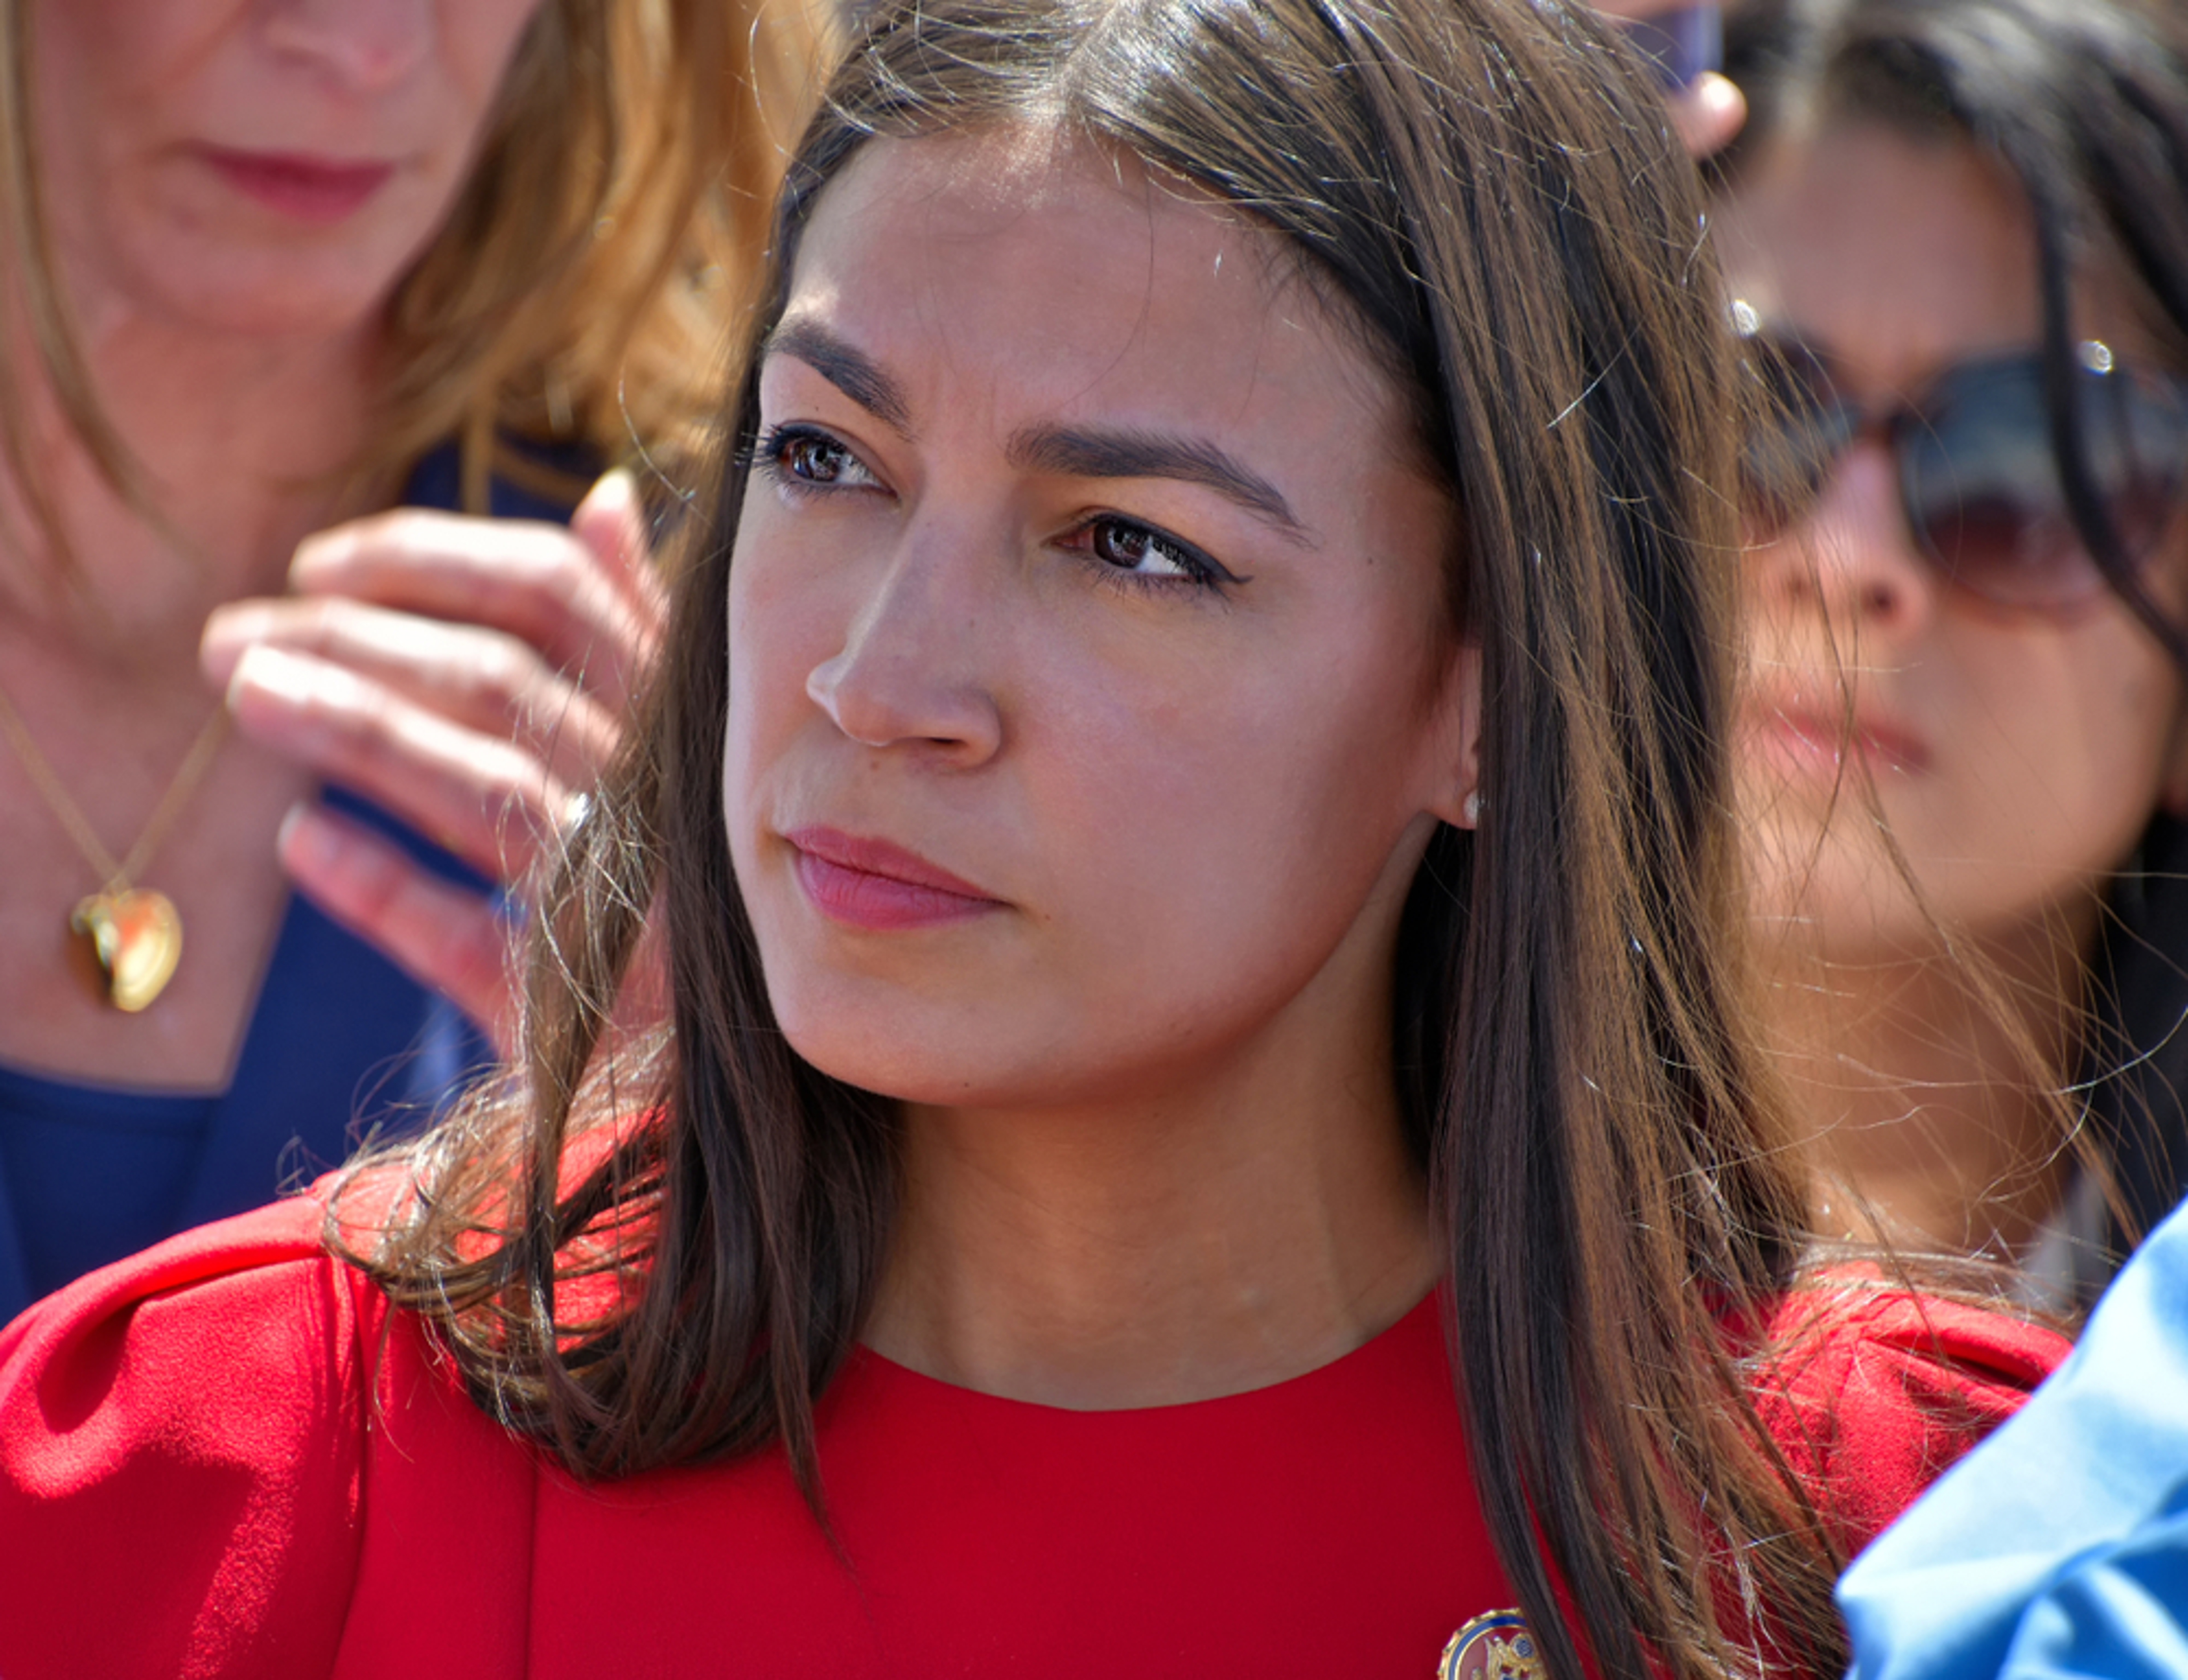 Criticizing Elon Musk Will Lead To Your Twitter Account Going Bad? Alexandria Ocasio-Cortez Alleges That&#39;s Exactly What Happened To Her